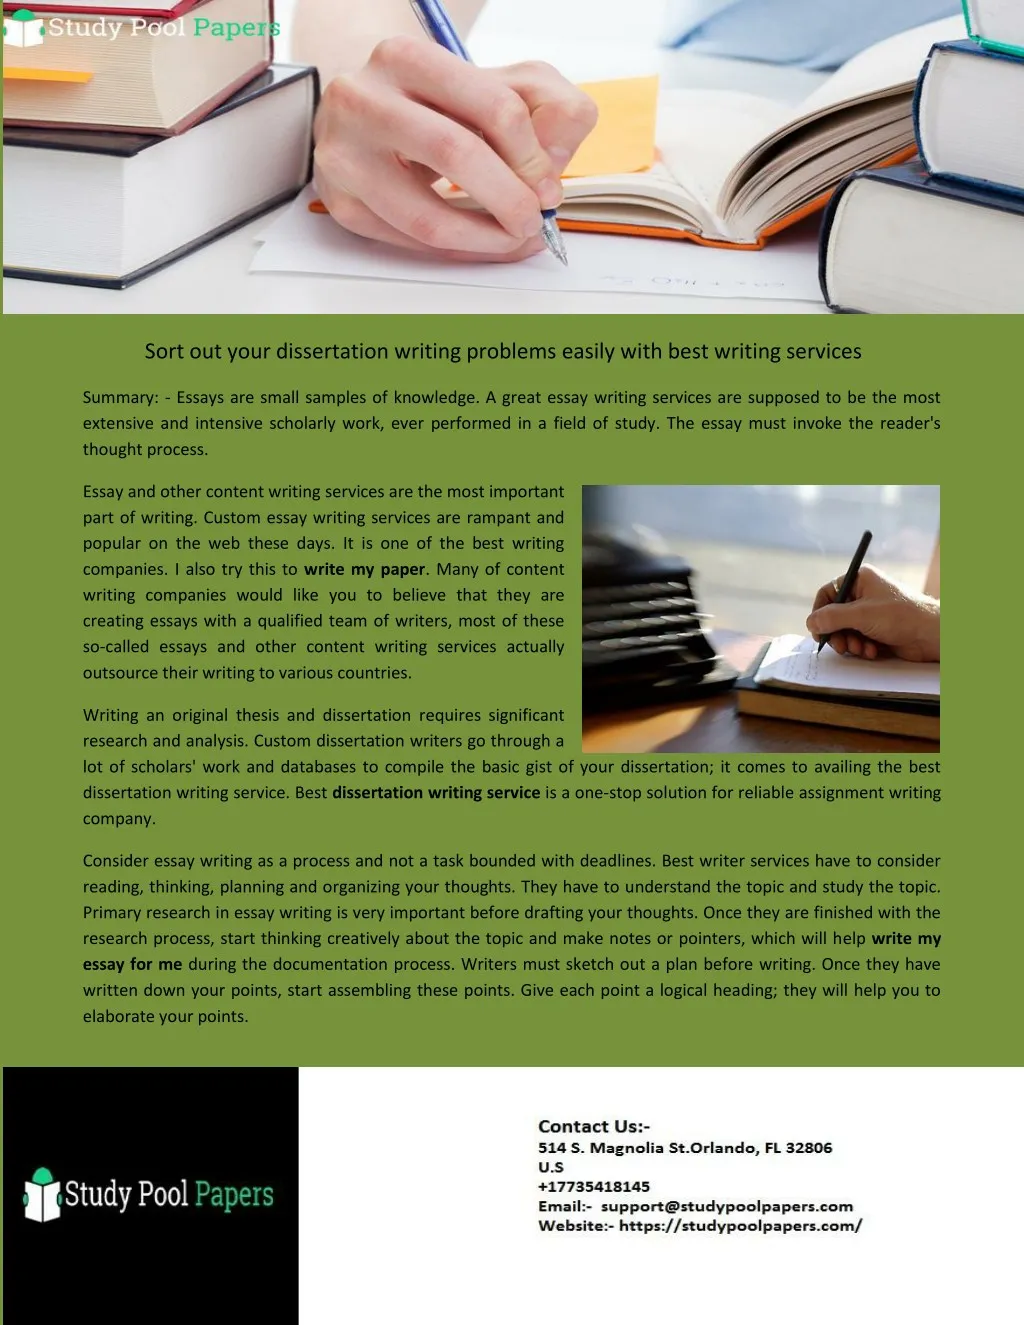 sort out your dissertation writing problems